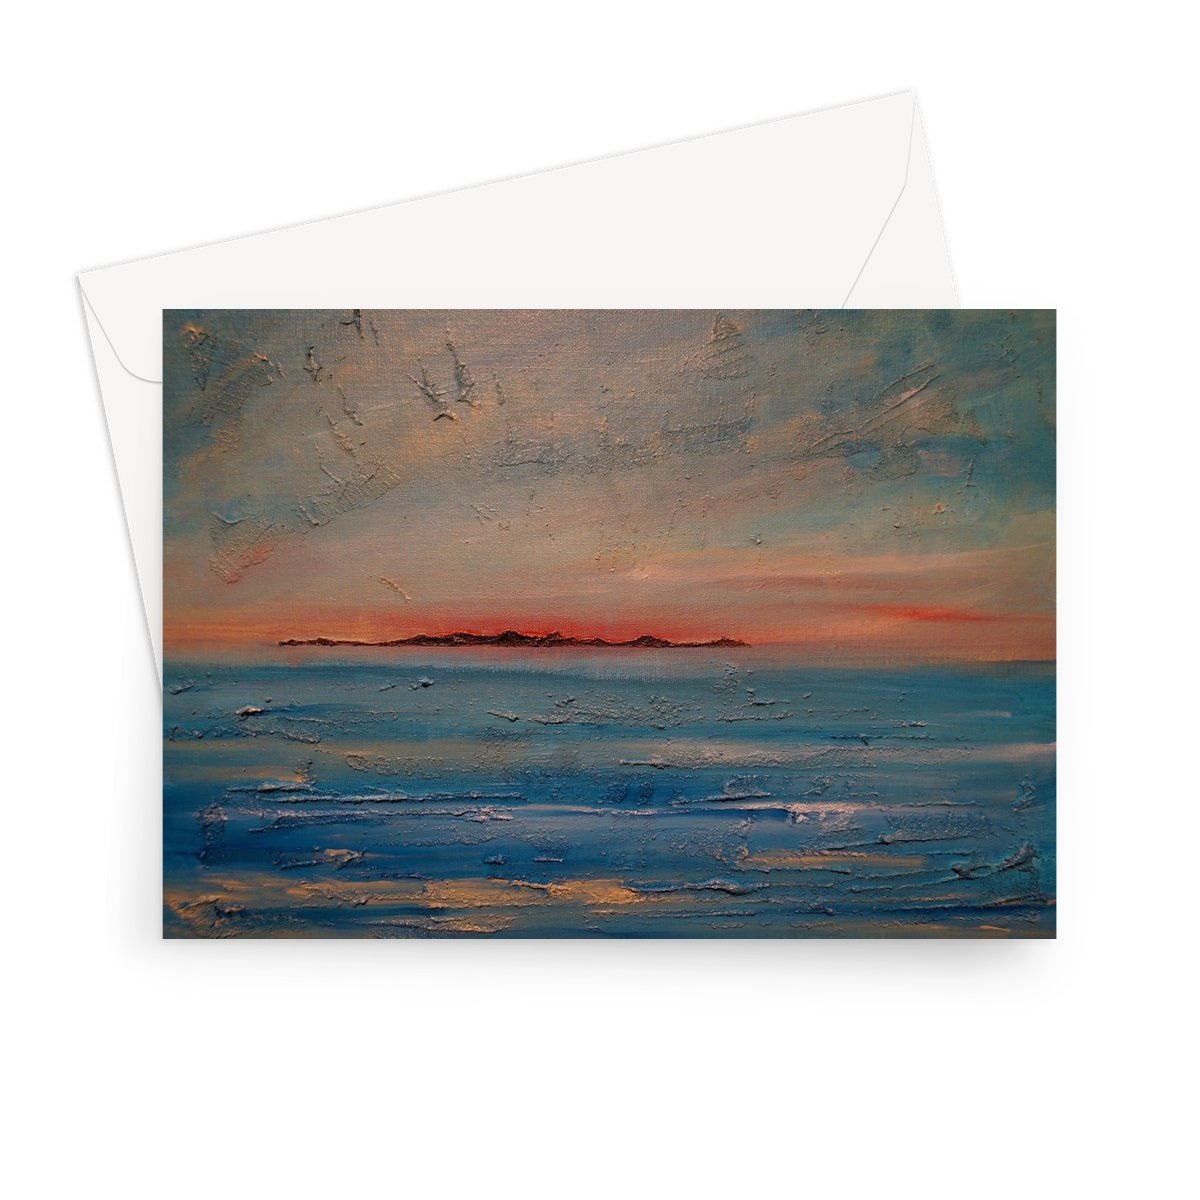 Gigha Sunset Art Gifts Greeting Card-Greetings Cards-Hebridean Islands Art Gallery-7"x5"-1 Card-Paintings, Prints, Homeware, Art Gifts From Scotland By Scottish Artist Kevin Hunter